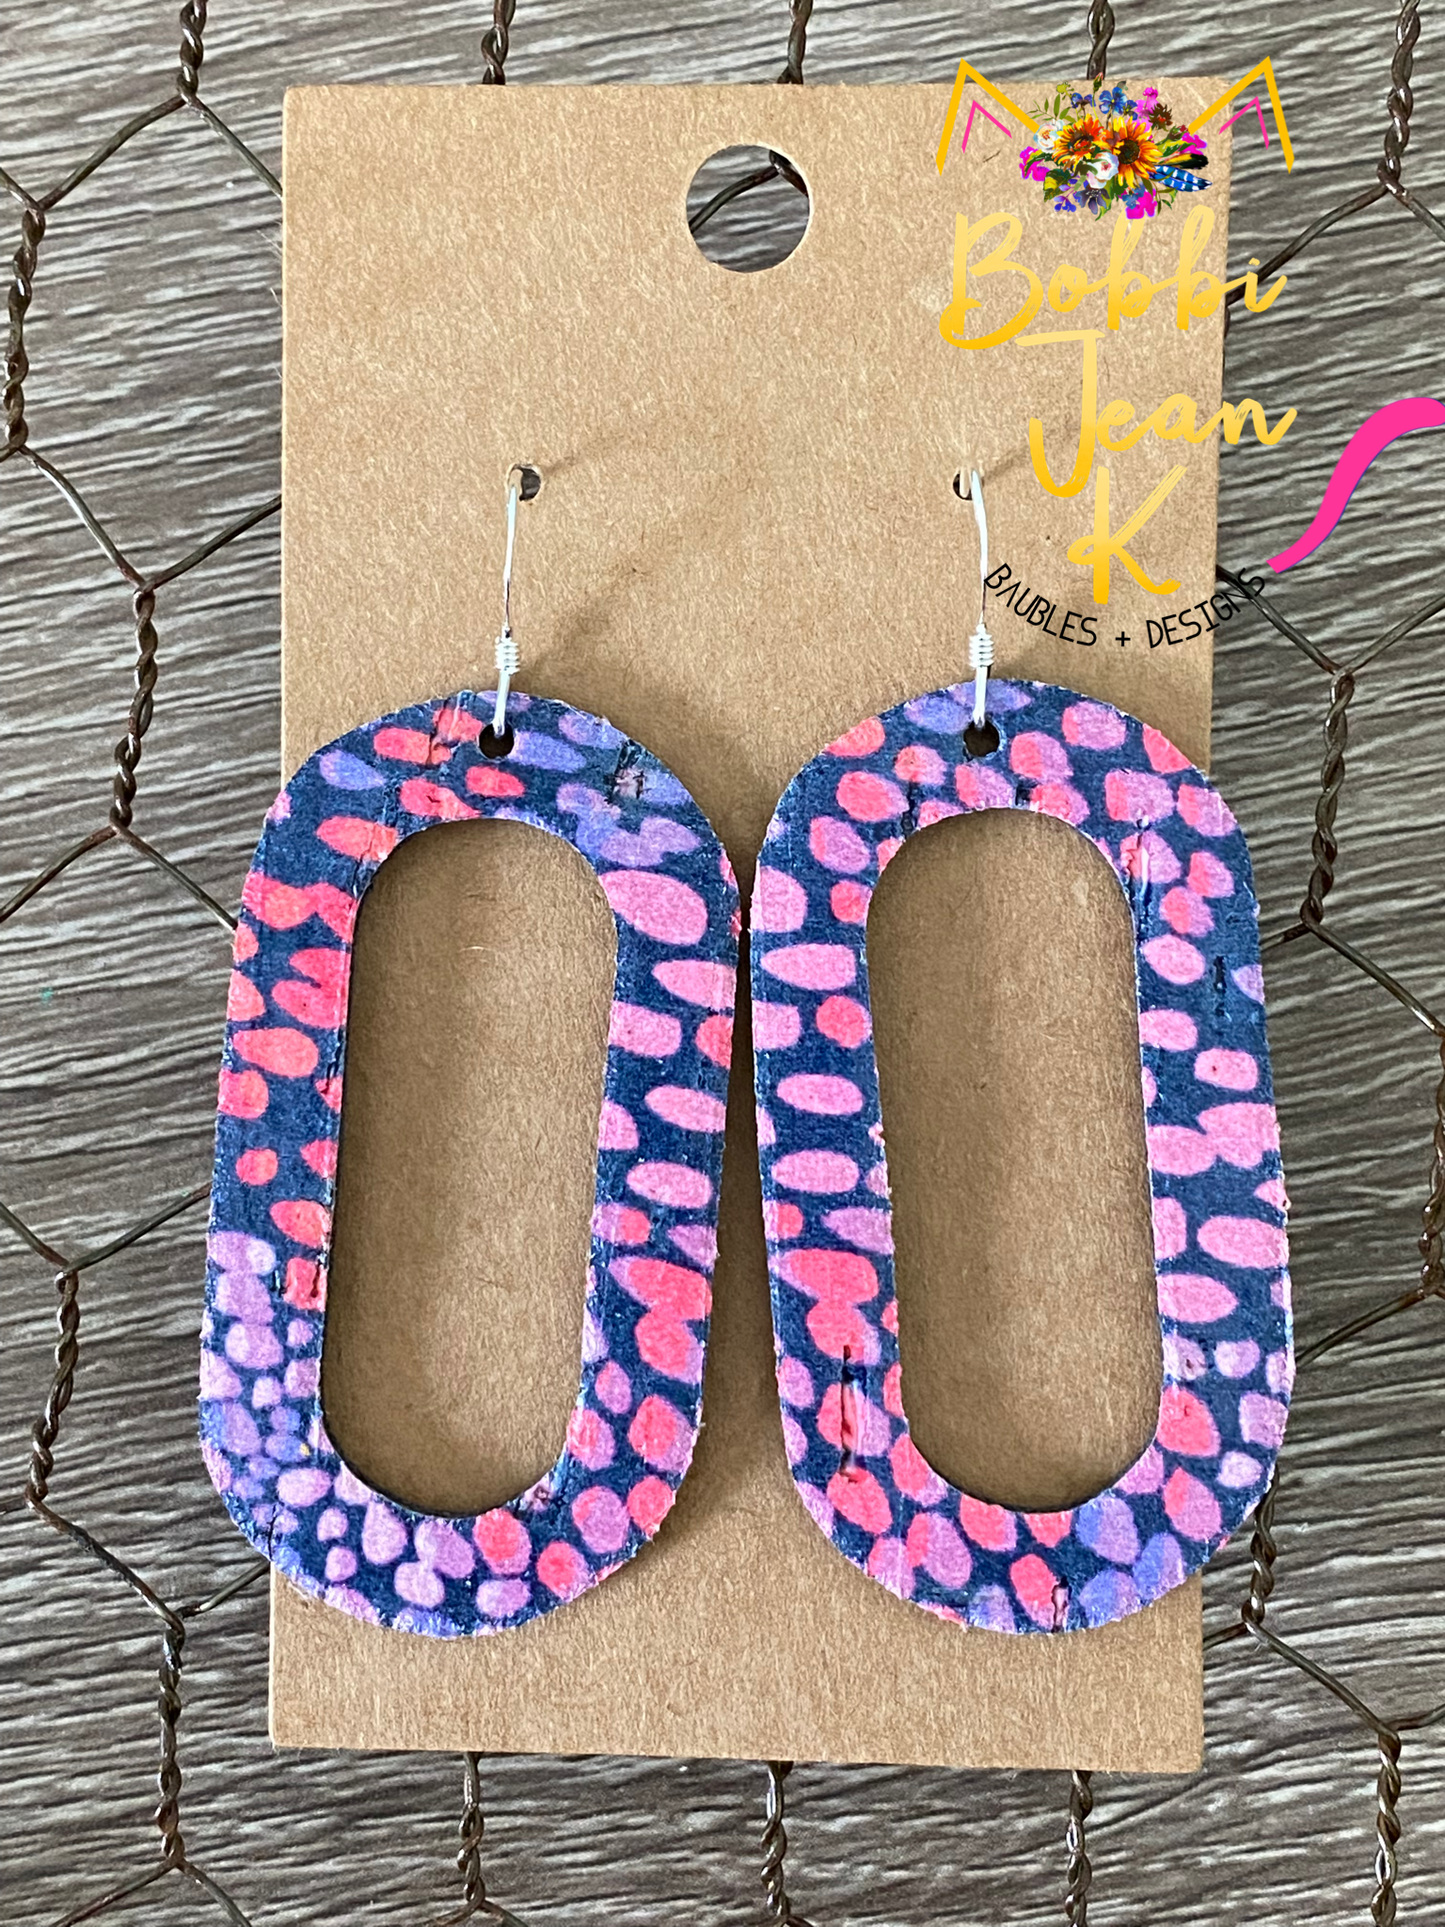 Berrylicious Reptile Cork on Leather Earrings: Open Oval, Bar, & Mini Oval Shape Options